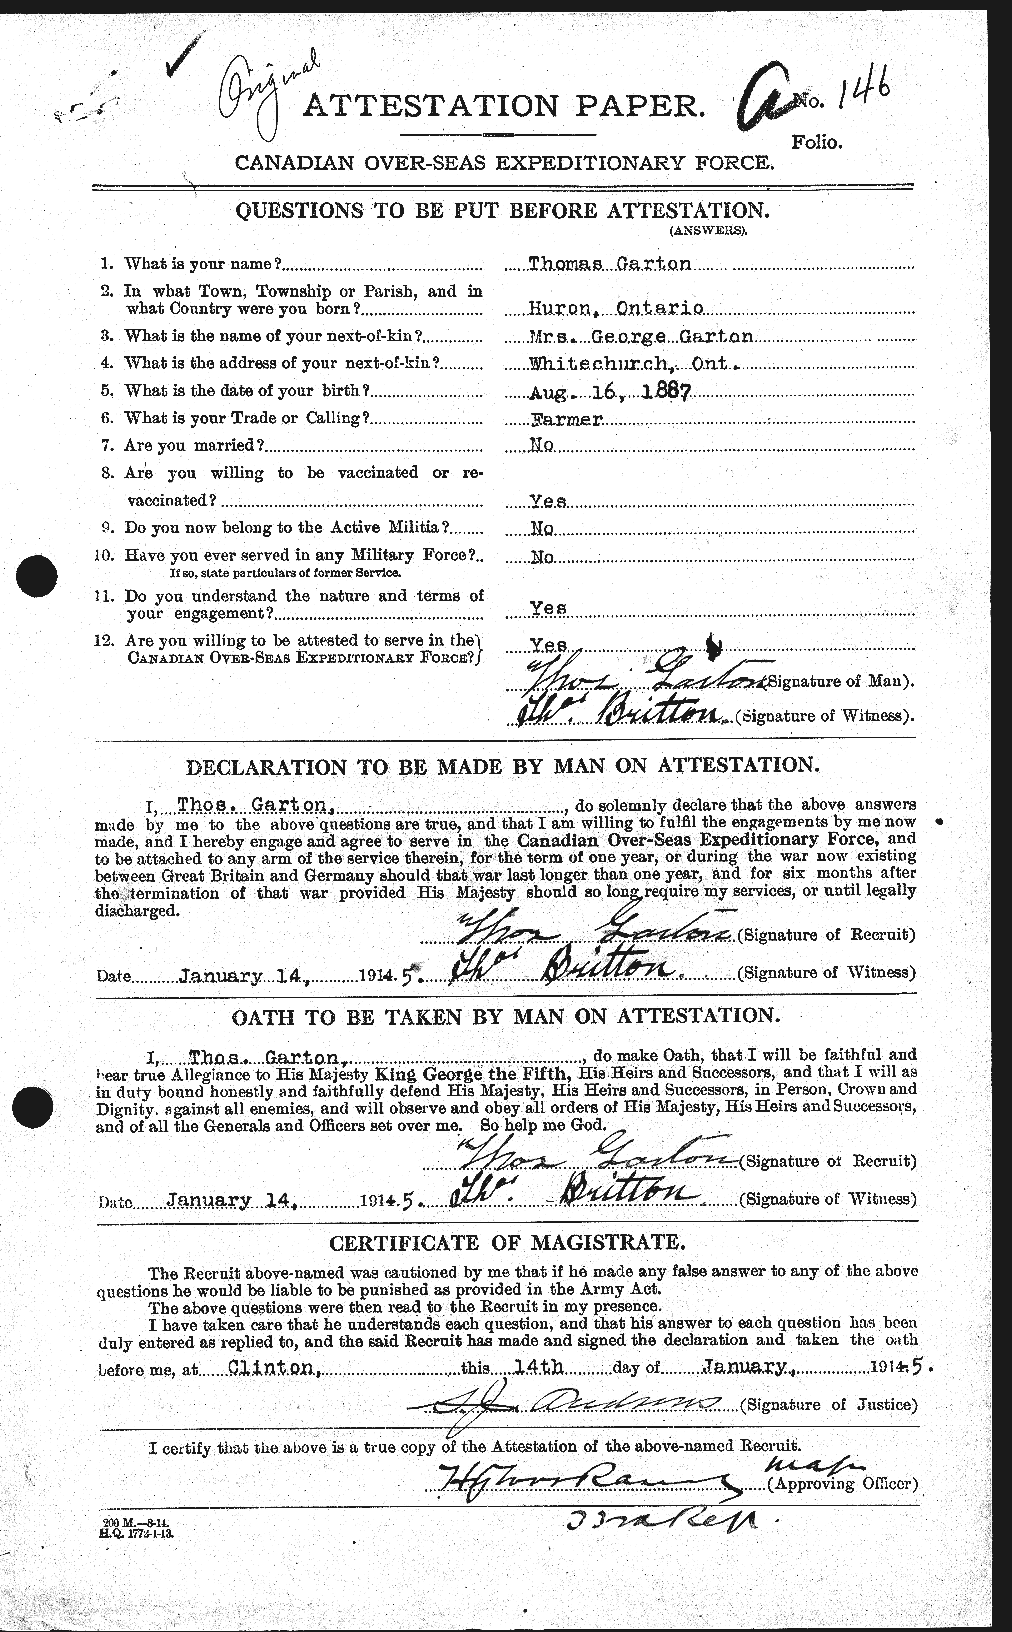 Personnel Records of the First World War - CEF 343580a